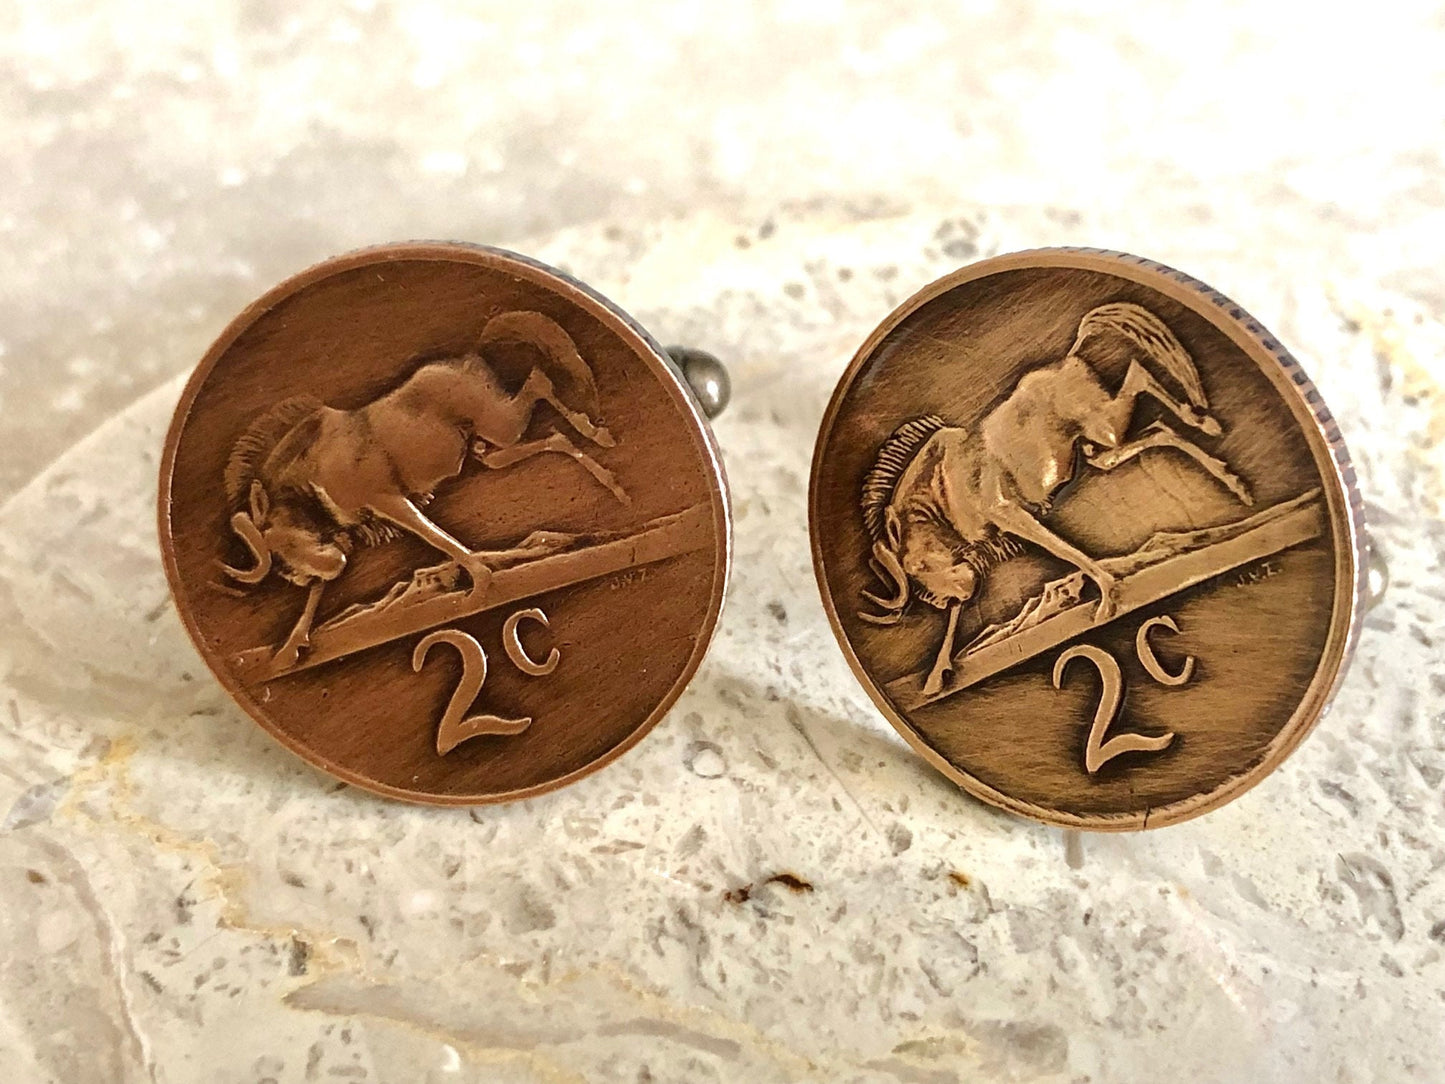 South Africa Coin Cuff Links African 2 Cents Personal Cufflinks Vintage Handmade Jewelry Gift Friend Charm For Him Her World Coin Collector